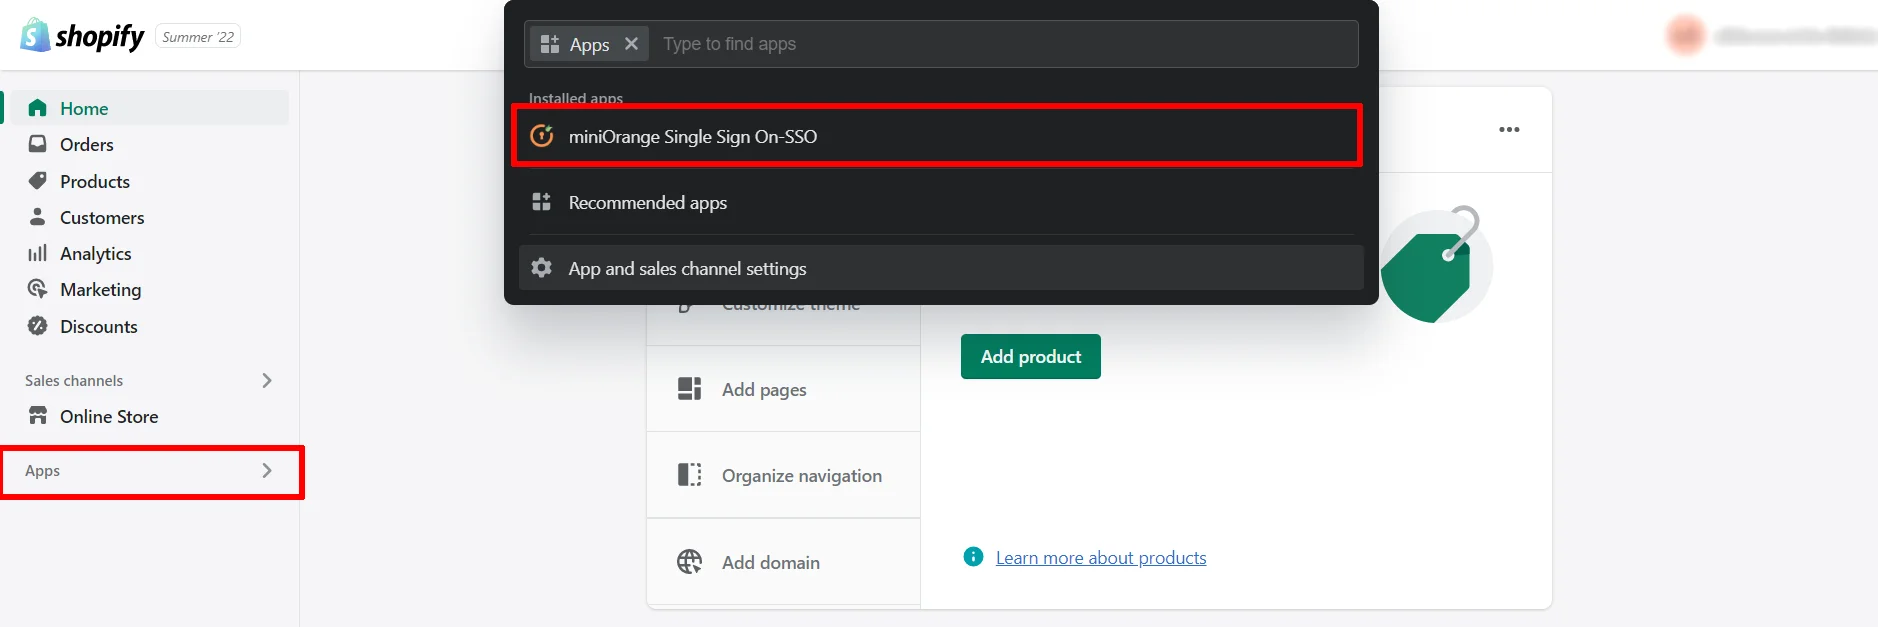 shopify (Microsoft Entra ID) Azure AD (OAuth) SSO - single sign on application